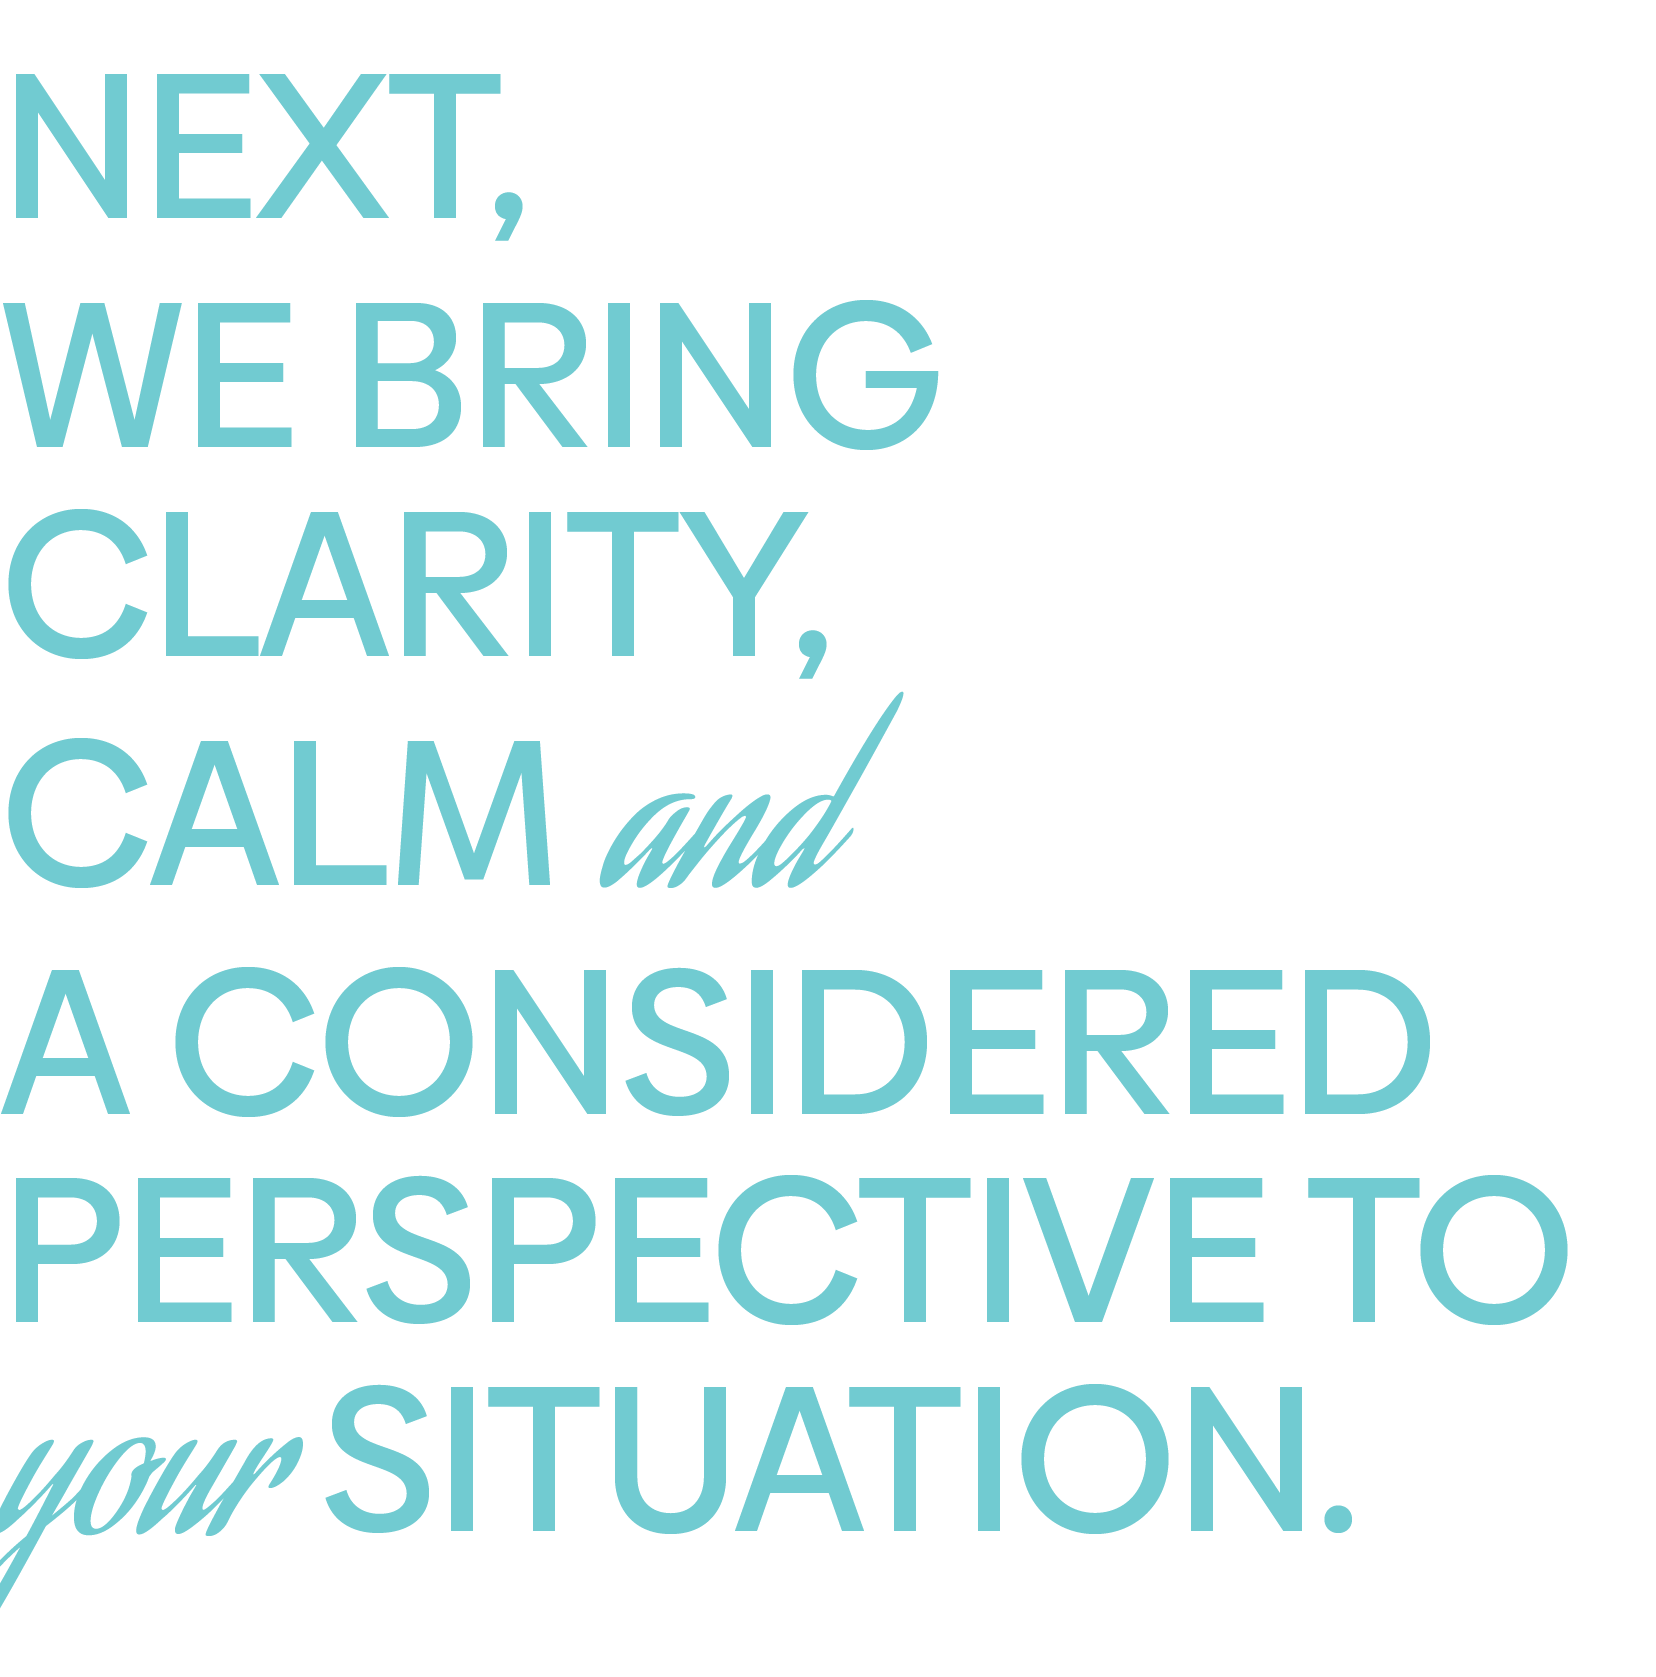 NEXT, WE BRING CLARITY, CALM and A CONSIDERED PERSPECTIVE TO your SITUATION.